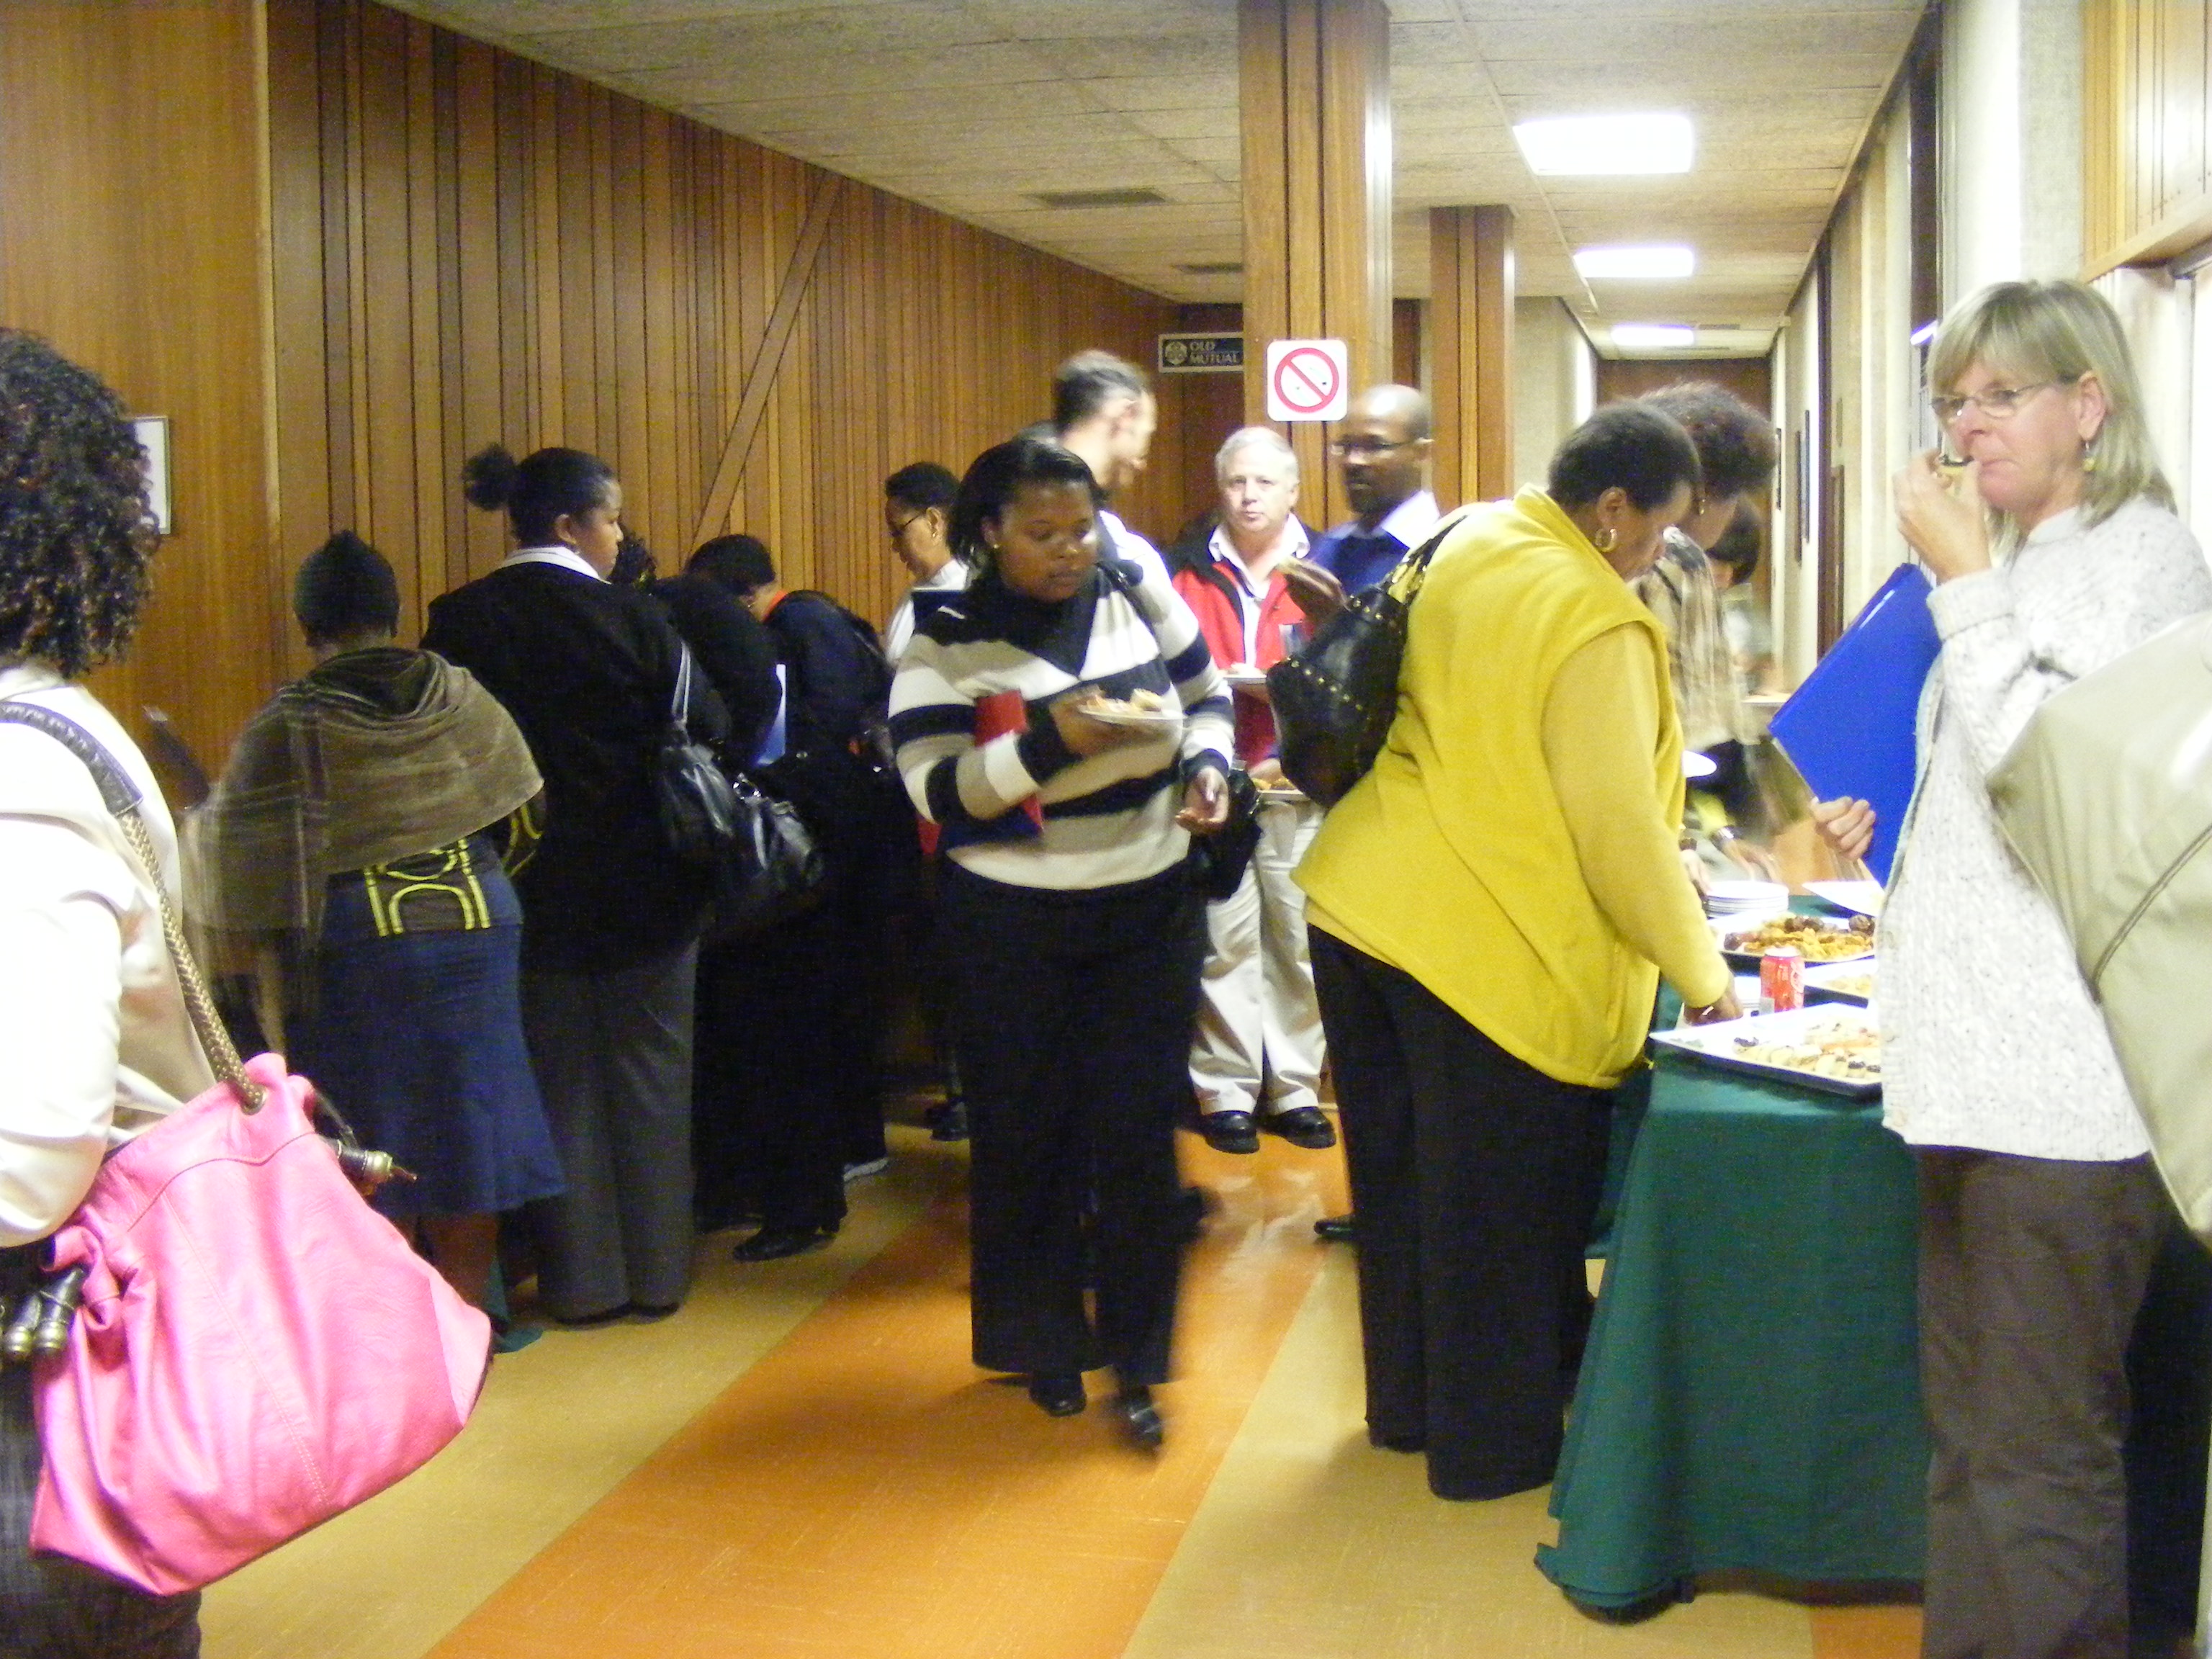 Refreshments and eats were enjoyed by all after the presentations